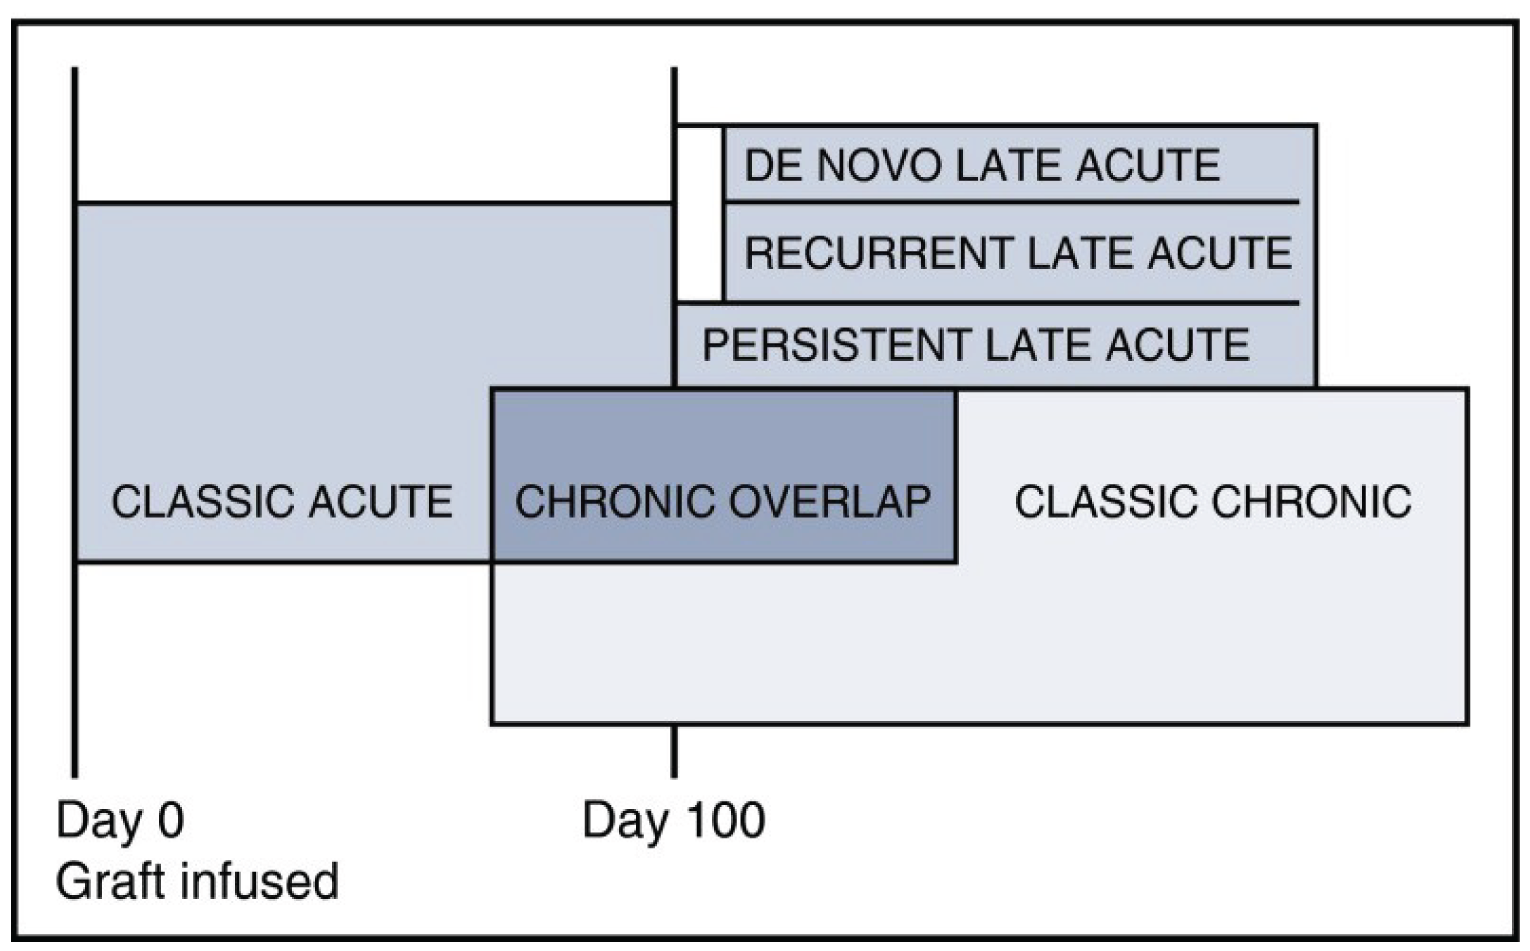 Figure outlining the overlap in and distinction between definitions of stages of graft versus host disease. Where Classic Acute begins at day 0, persistent late acute defined after day 100, classic chronic occurring sometime before and after day 100 and the mixing between classic acute and classic chronic for chronic overlap. Finally, the delayed start after day 100 for de novo late acute and recurrent late acute.